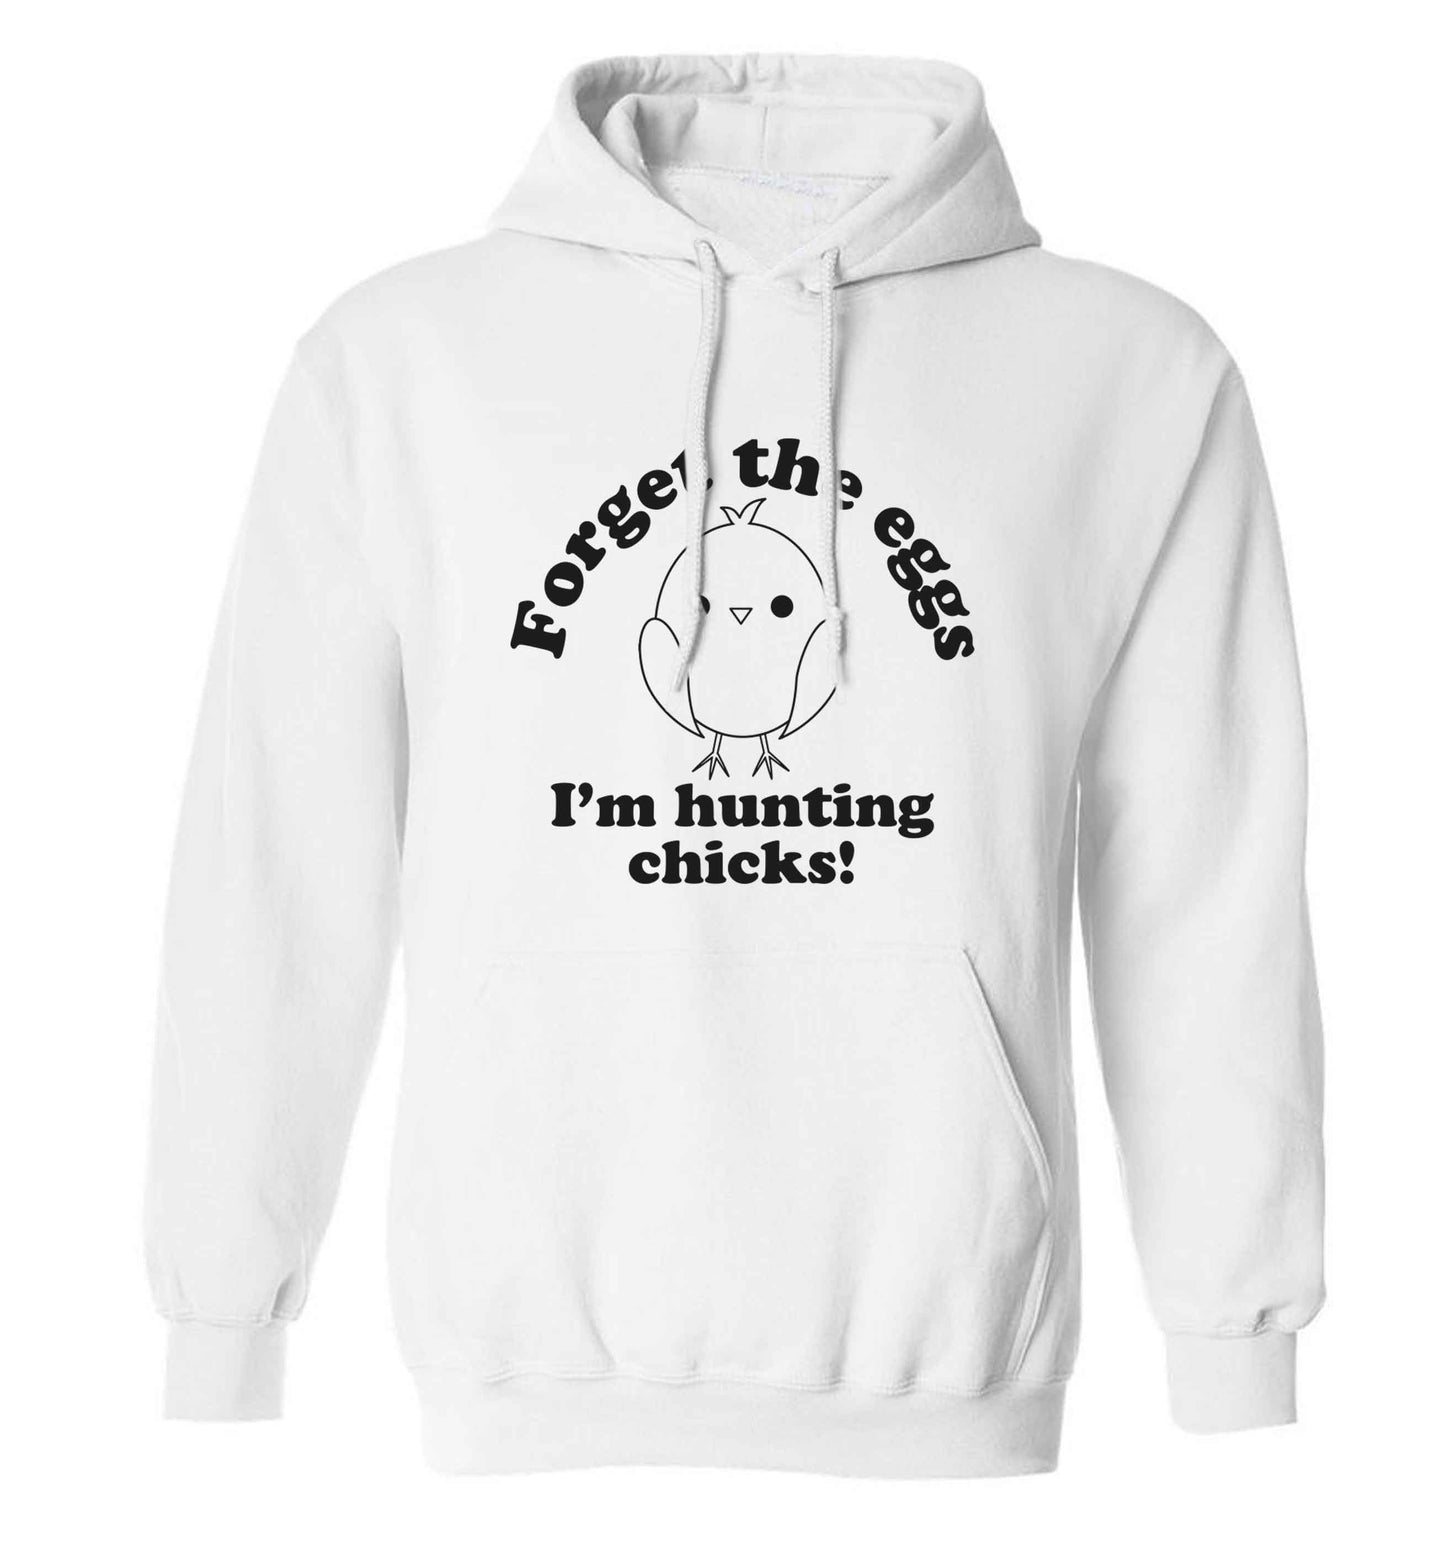 Forget the eggs I'm hunting chicks! adults unisex white hoodie 2XL